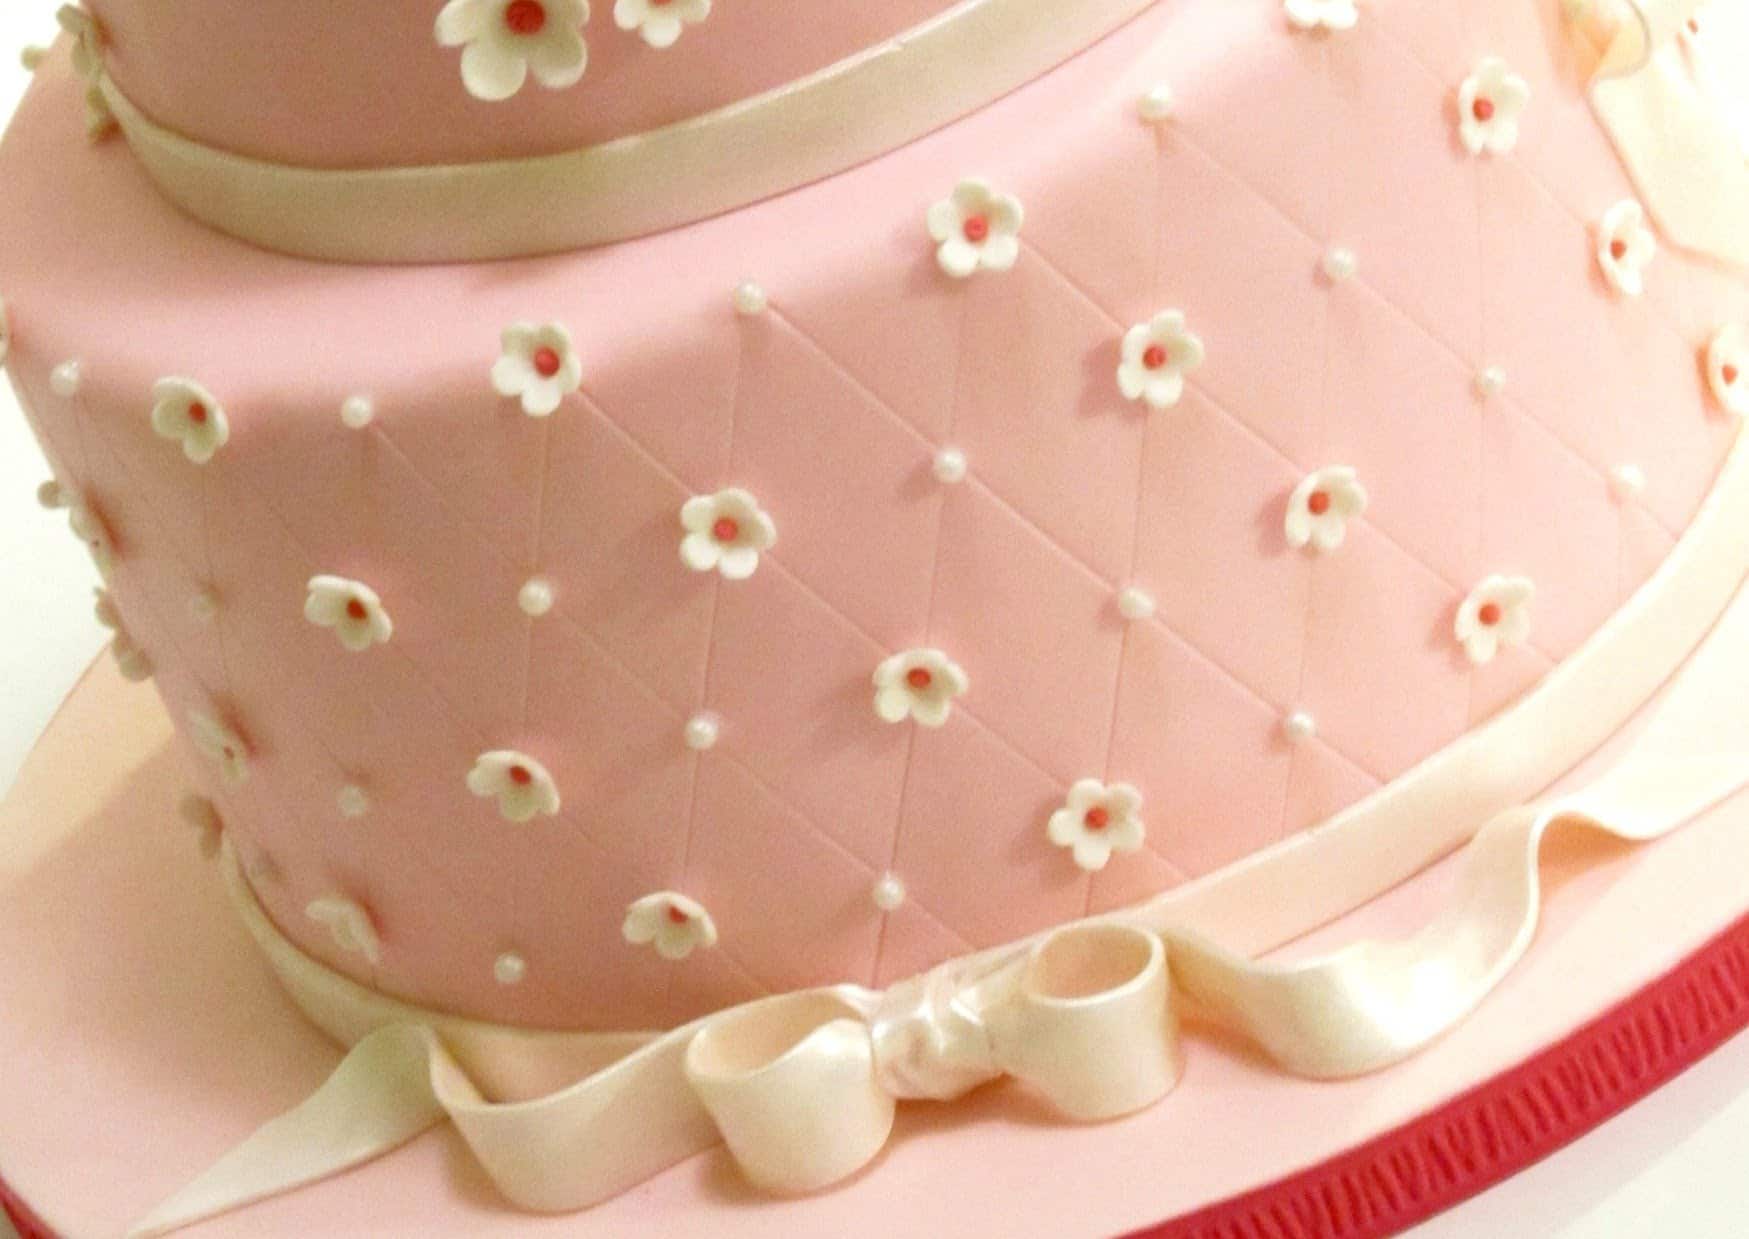 quilted pattern cake